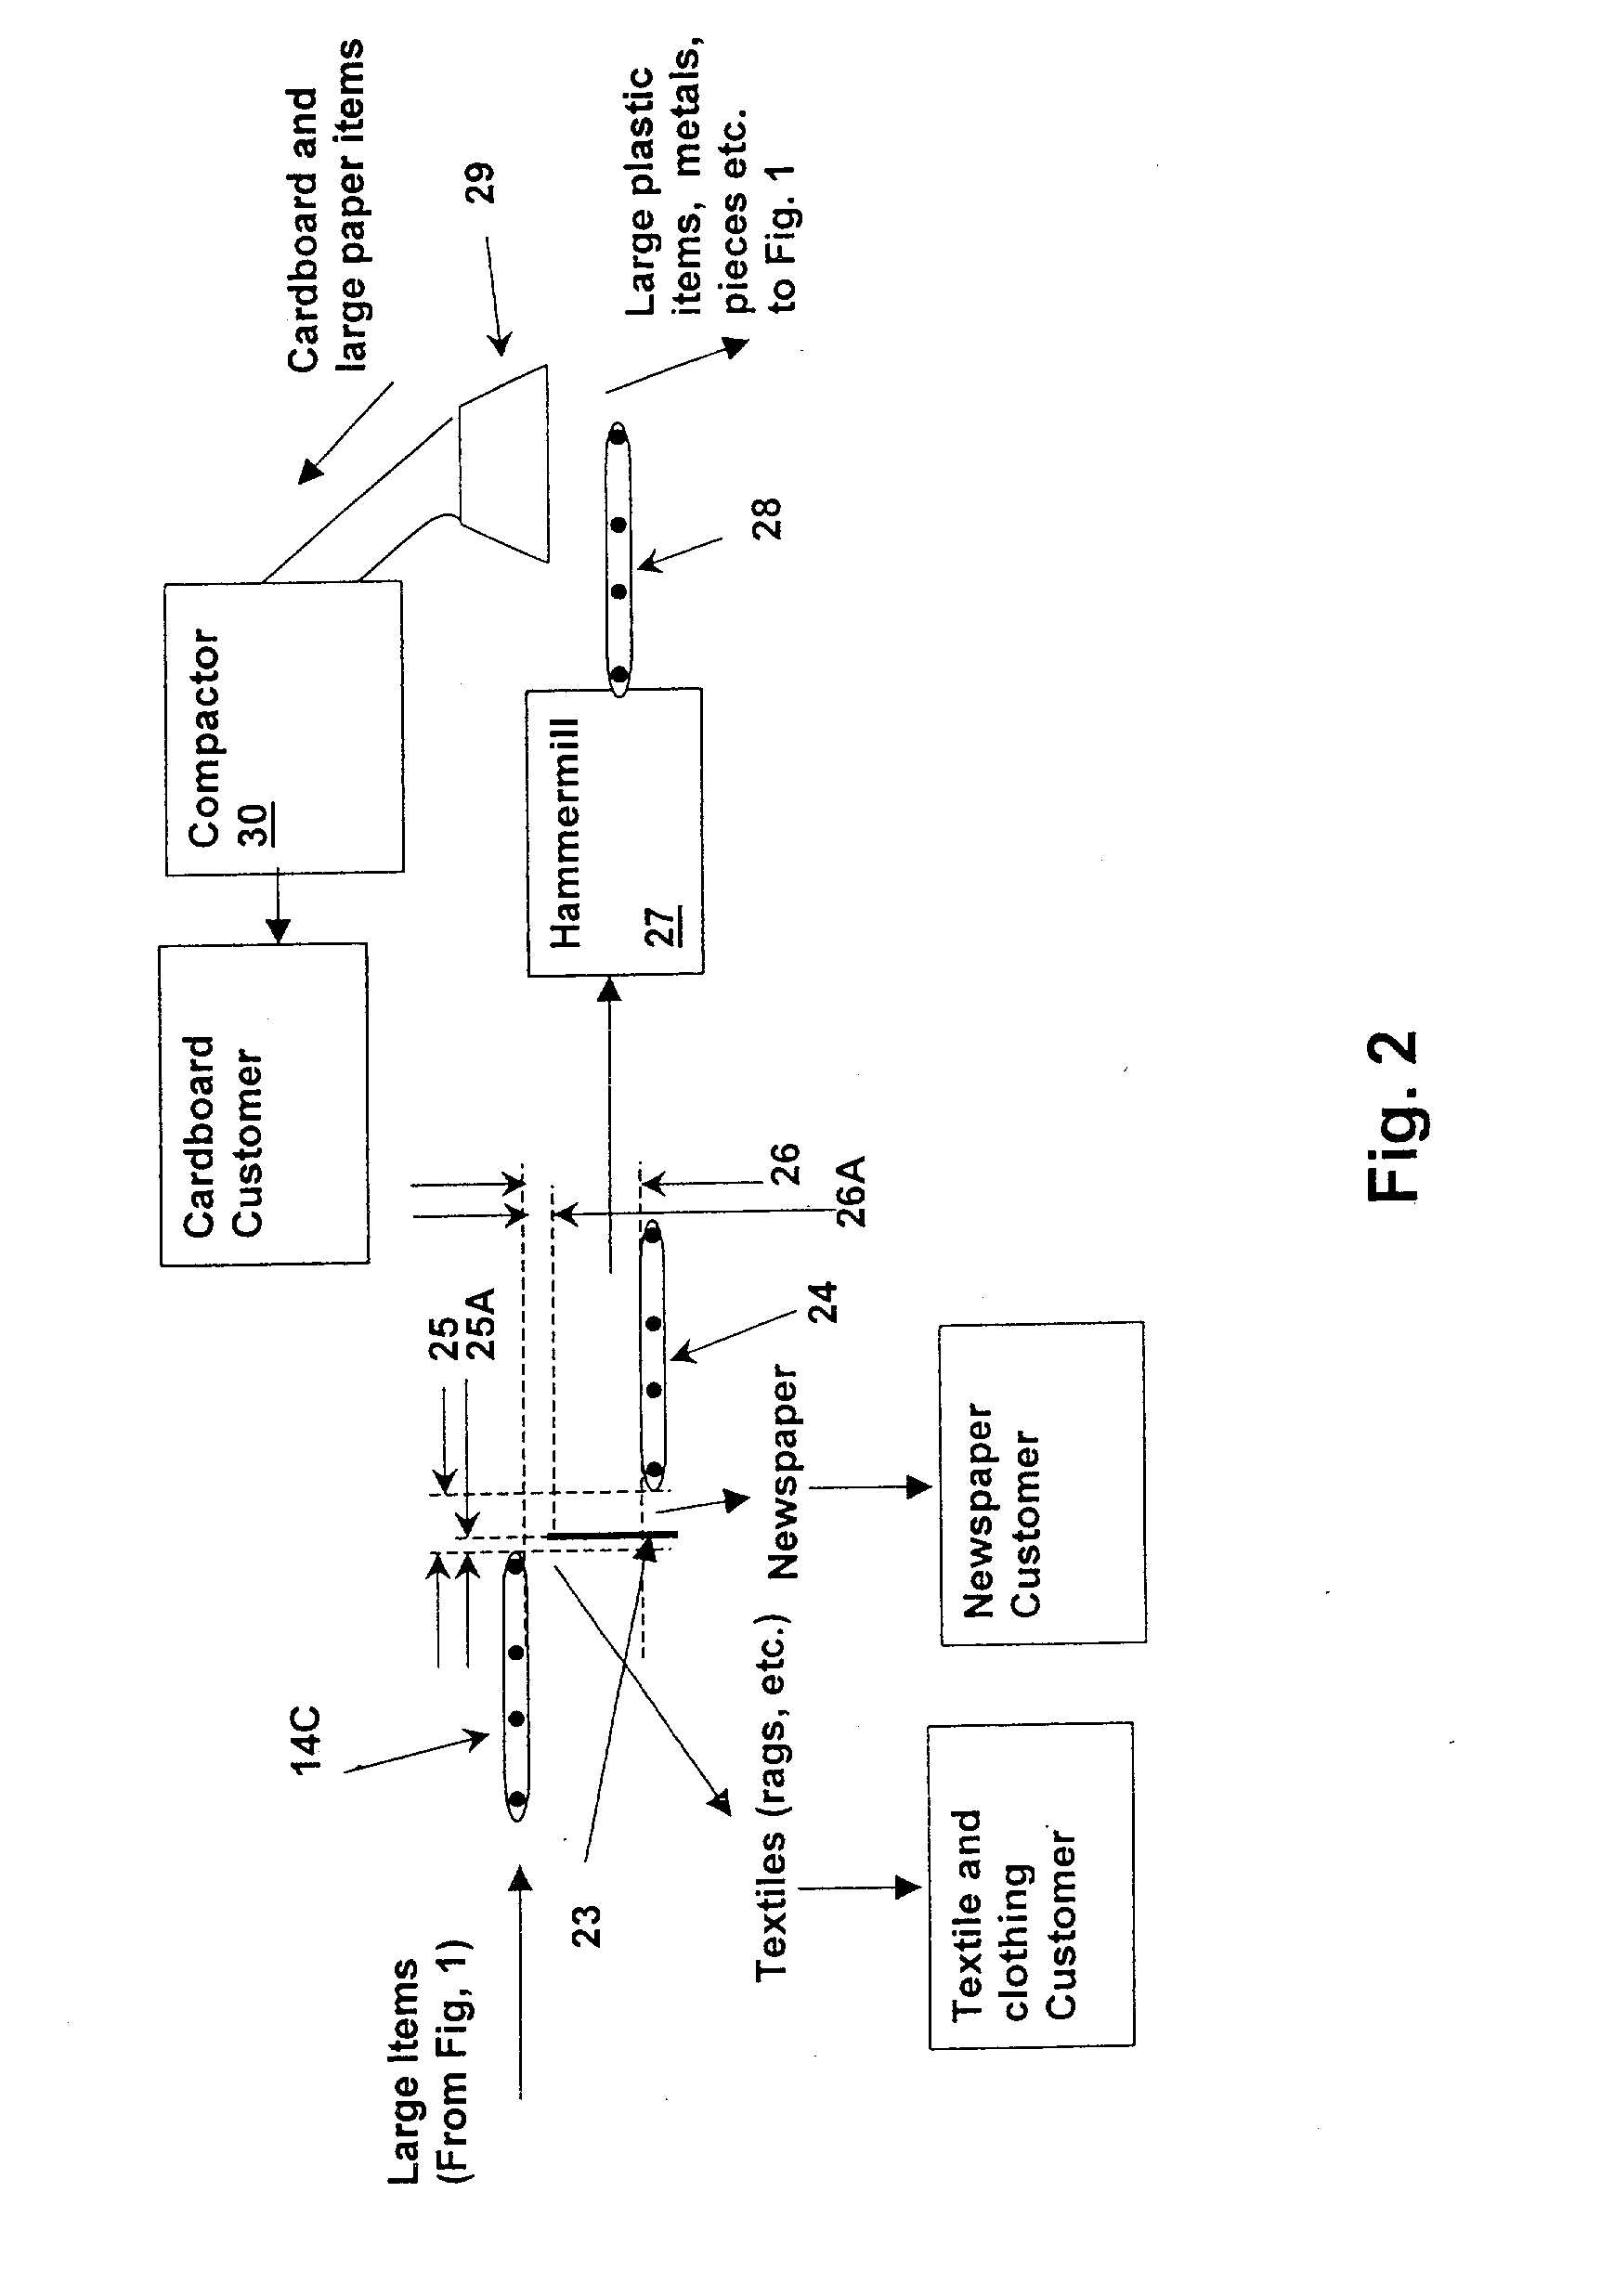 Method and system for separating and sorting recyclable materials from mixed waste streams